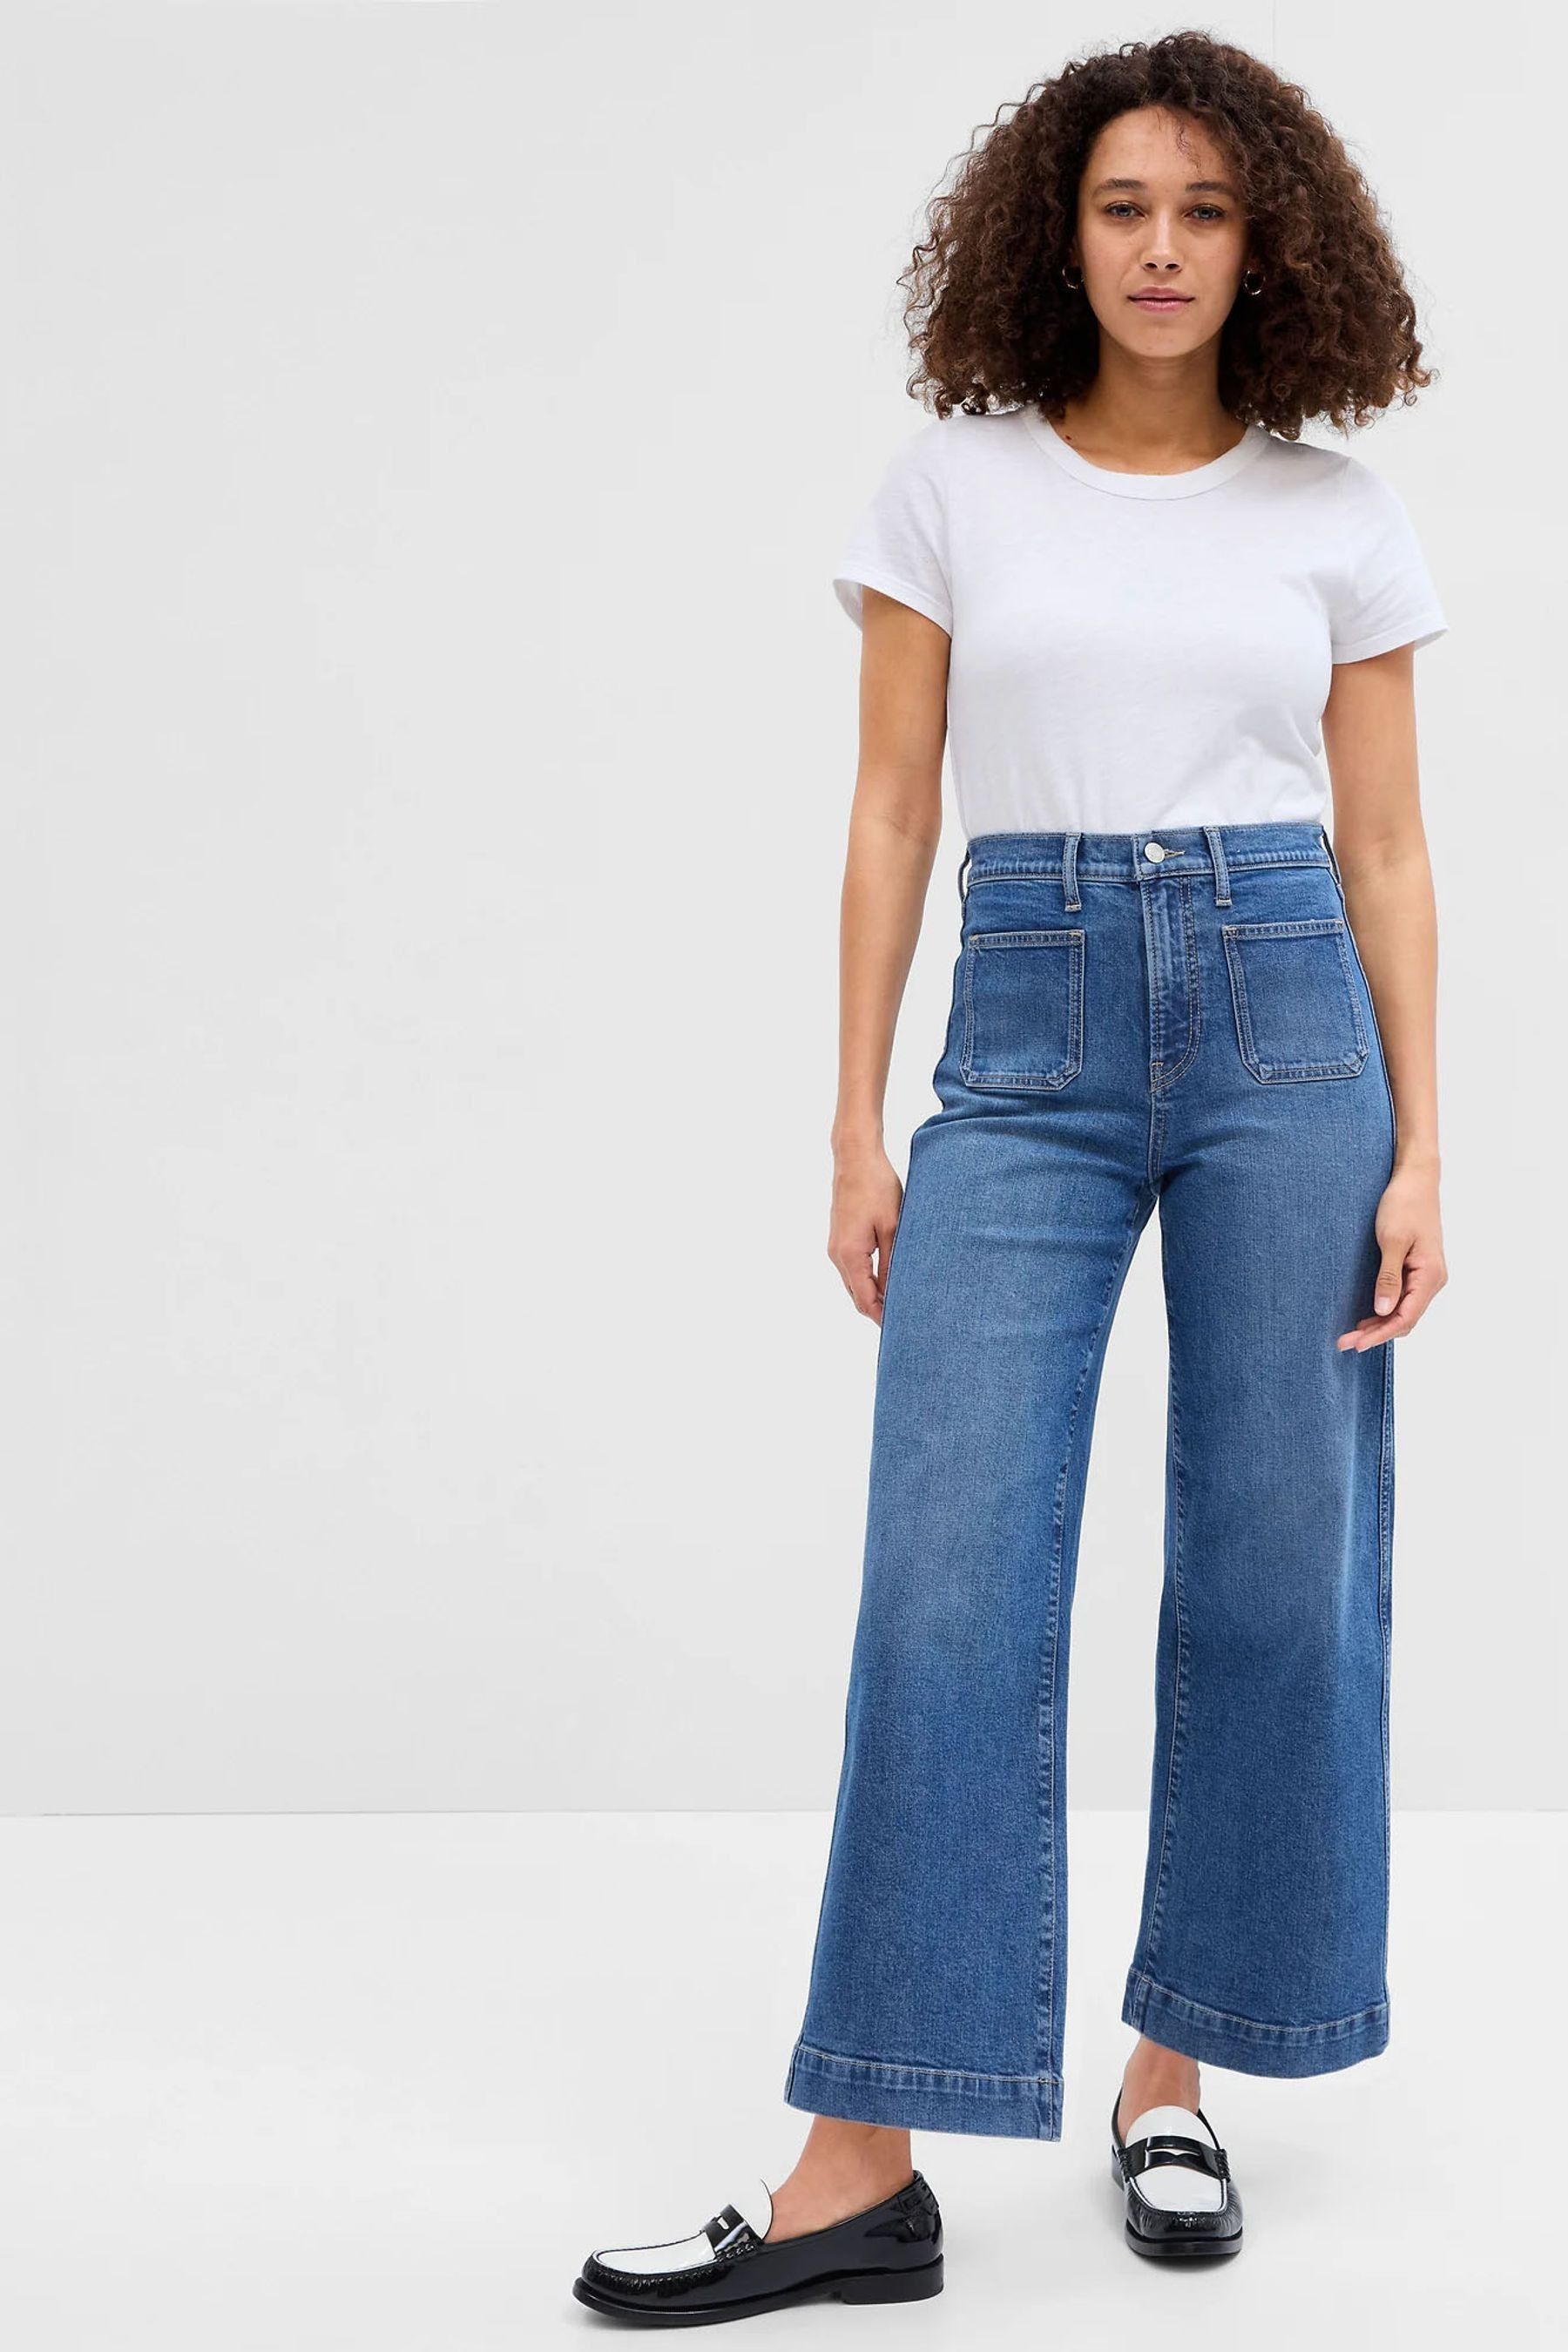 Buy Mid Wash Blue High Waisted Wide Leg Cropped Jeans from the Gap ...